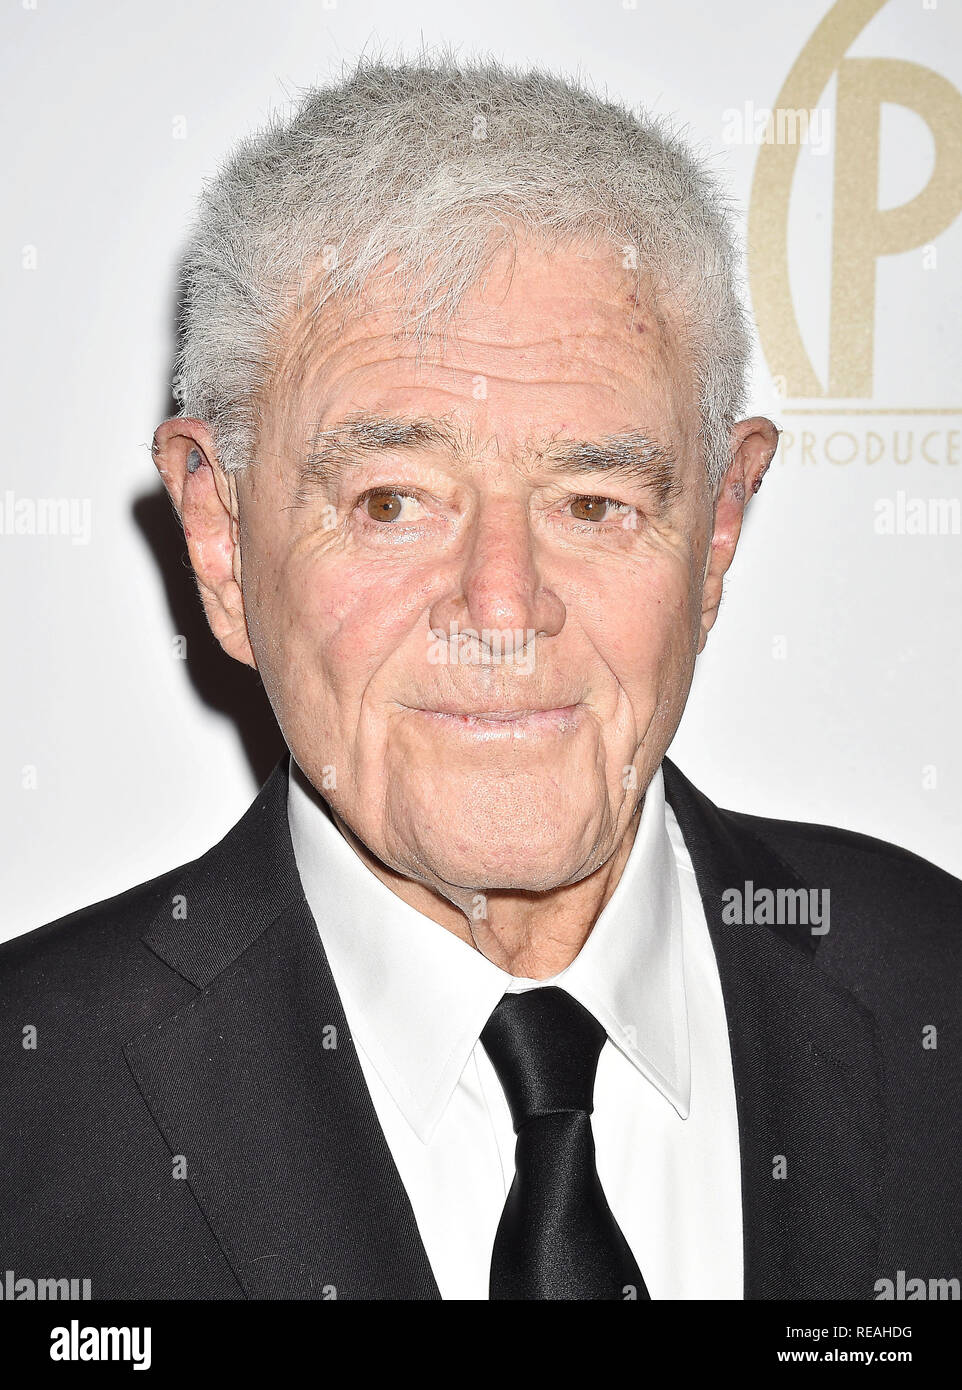 Beverly Hills, California, USA. 19th January, 2019. Richard Donner attends the 30th Annual Producers Guild Awards at The Beverly Hilton Hotel on January 19, 2019 in Beverly Hills, California. Credit: Jeffrey Mayer/Alamy Live News Stock Photo